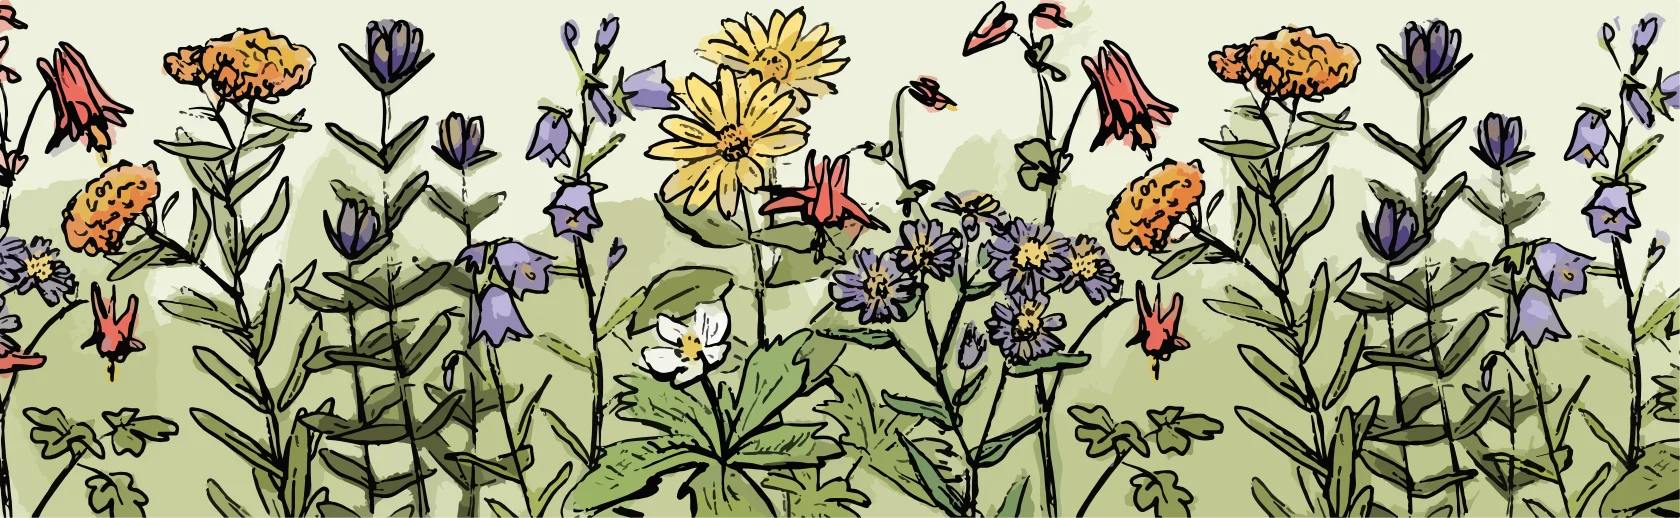 Beautiful artwork of native flowers and insects